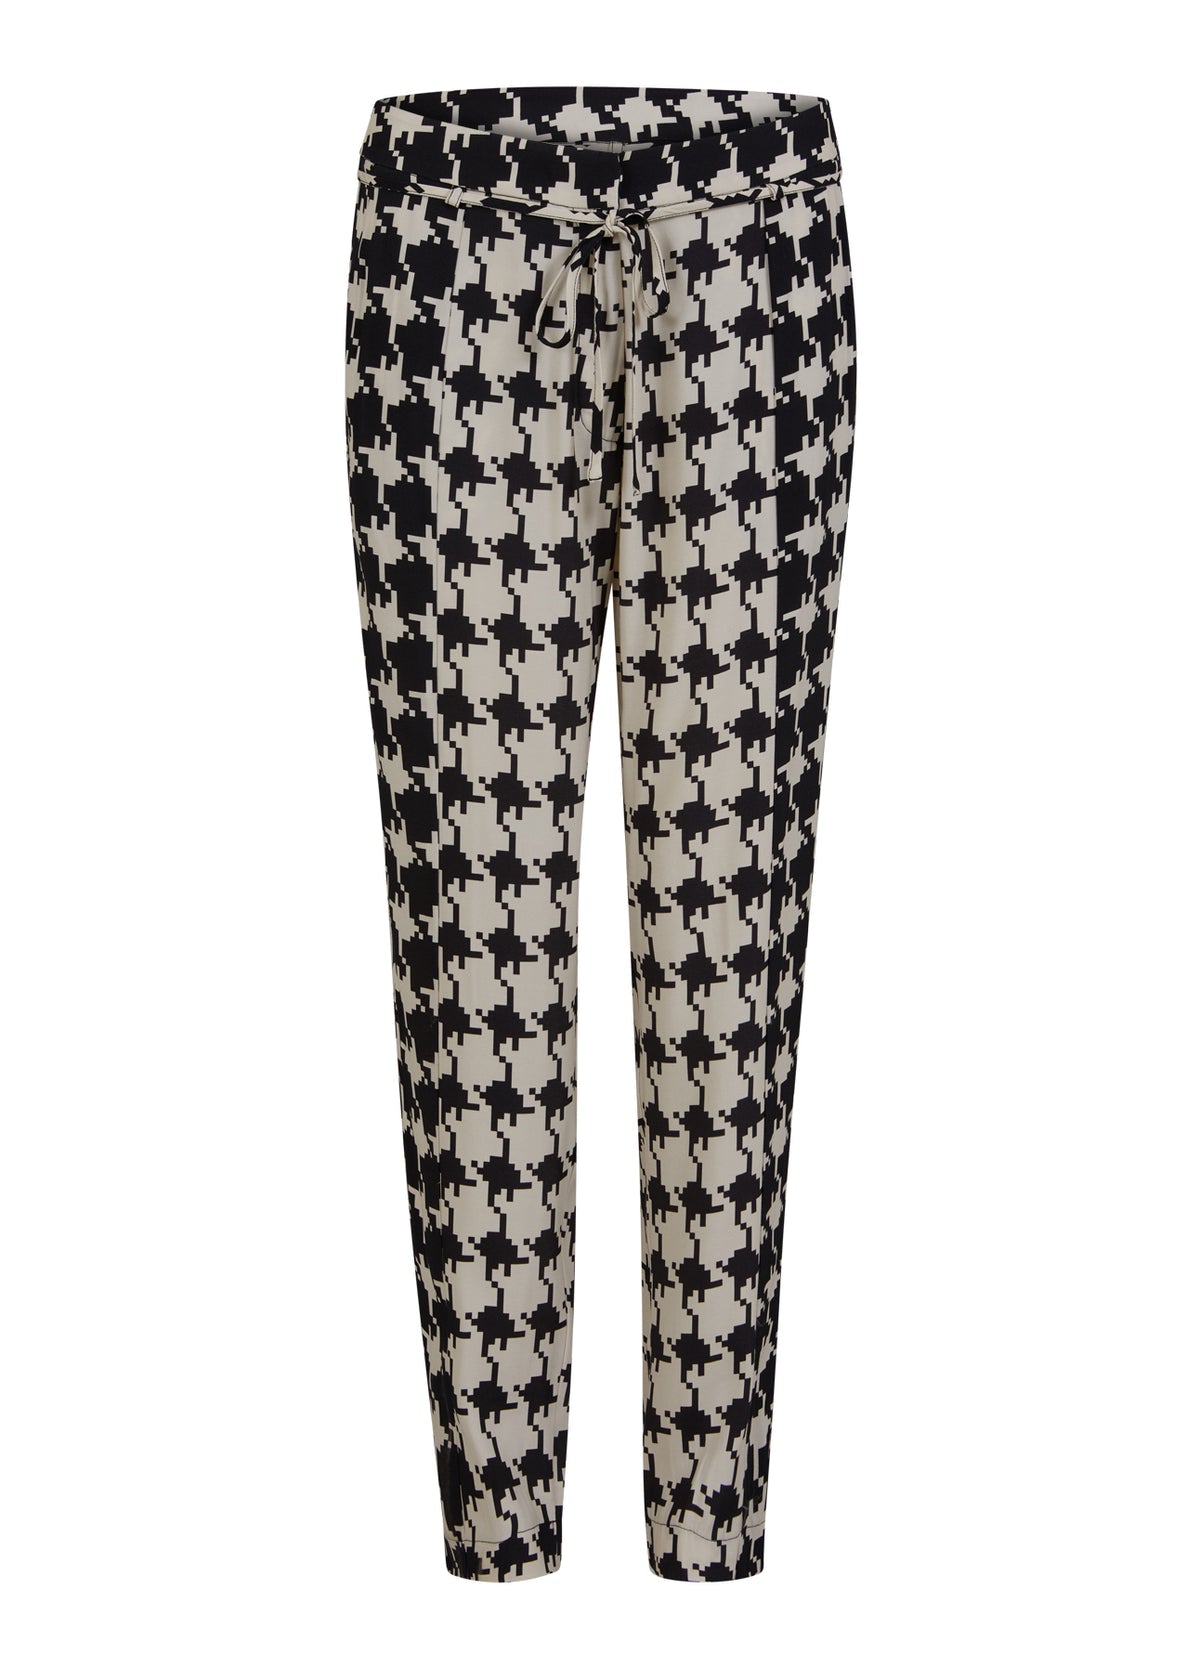 Houndstooth Black and Cream Trousers